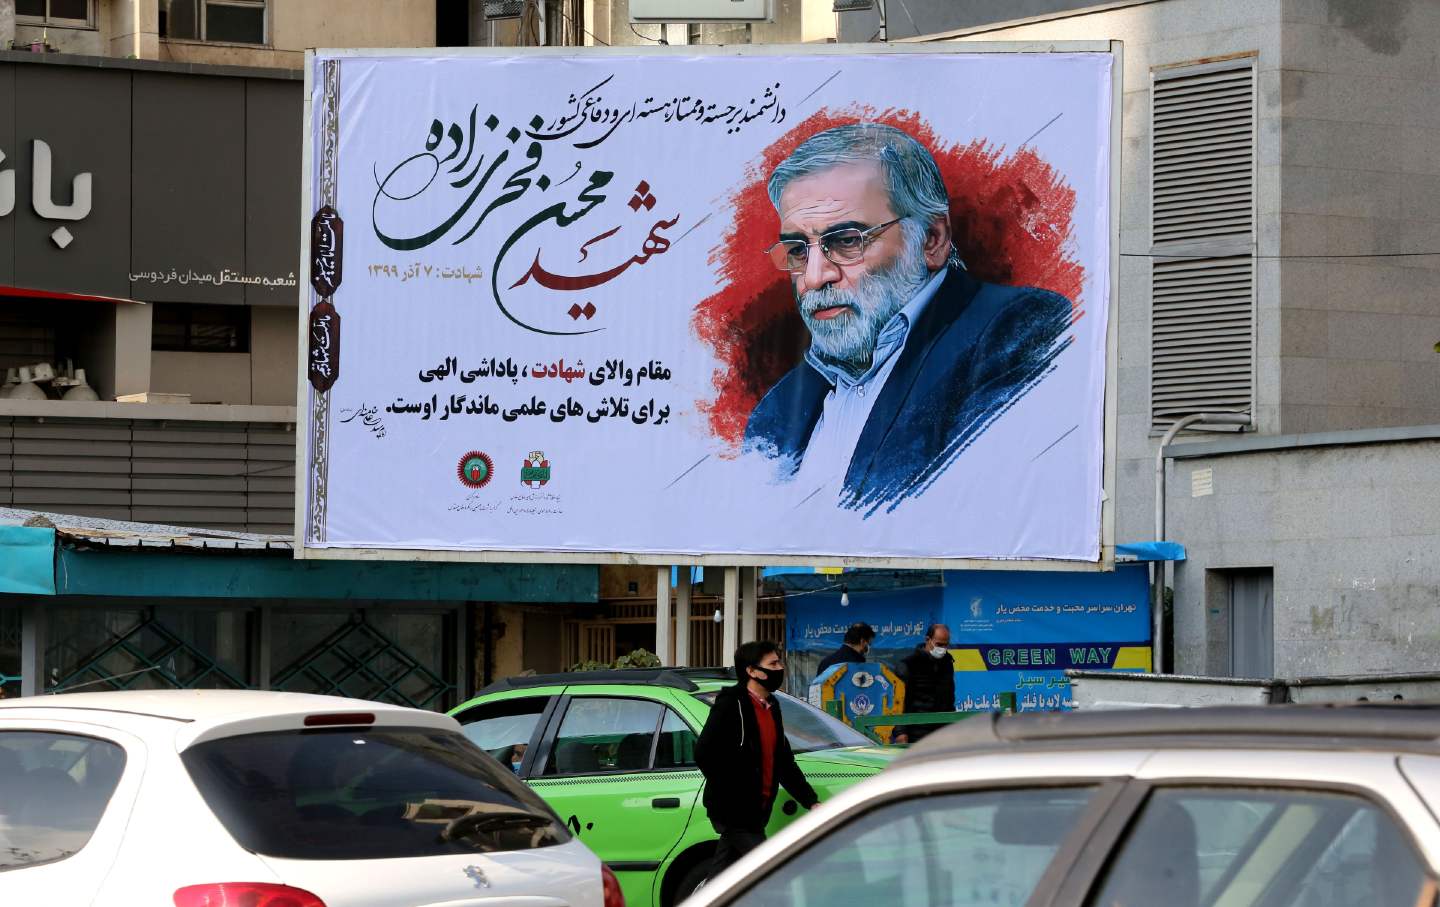 Vehicles drive by a billboard featuring Mohsen Fakhrizadeh